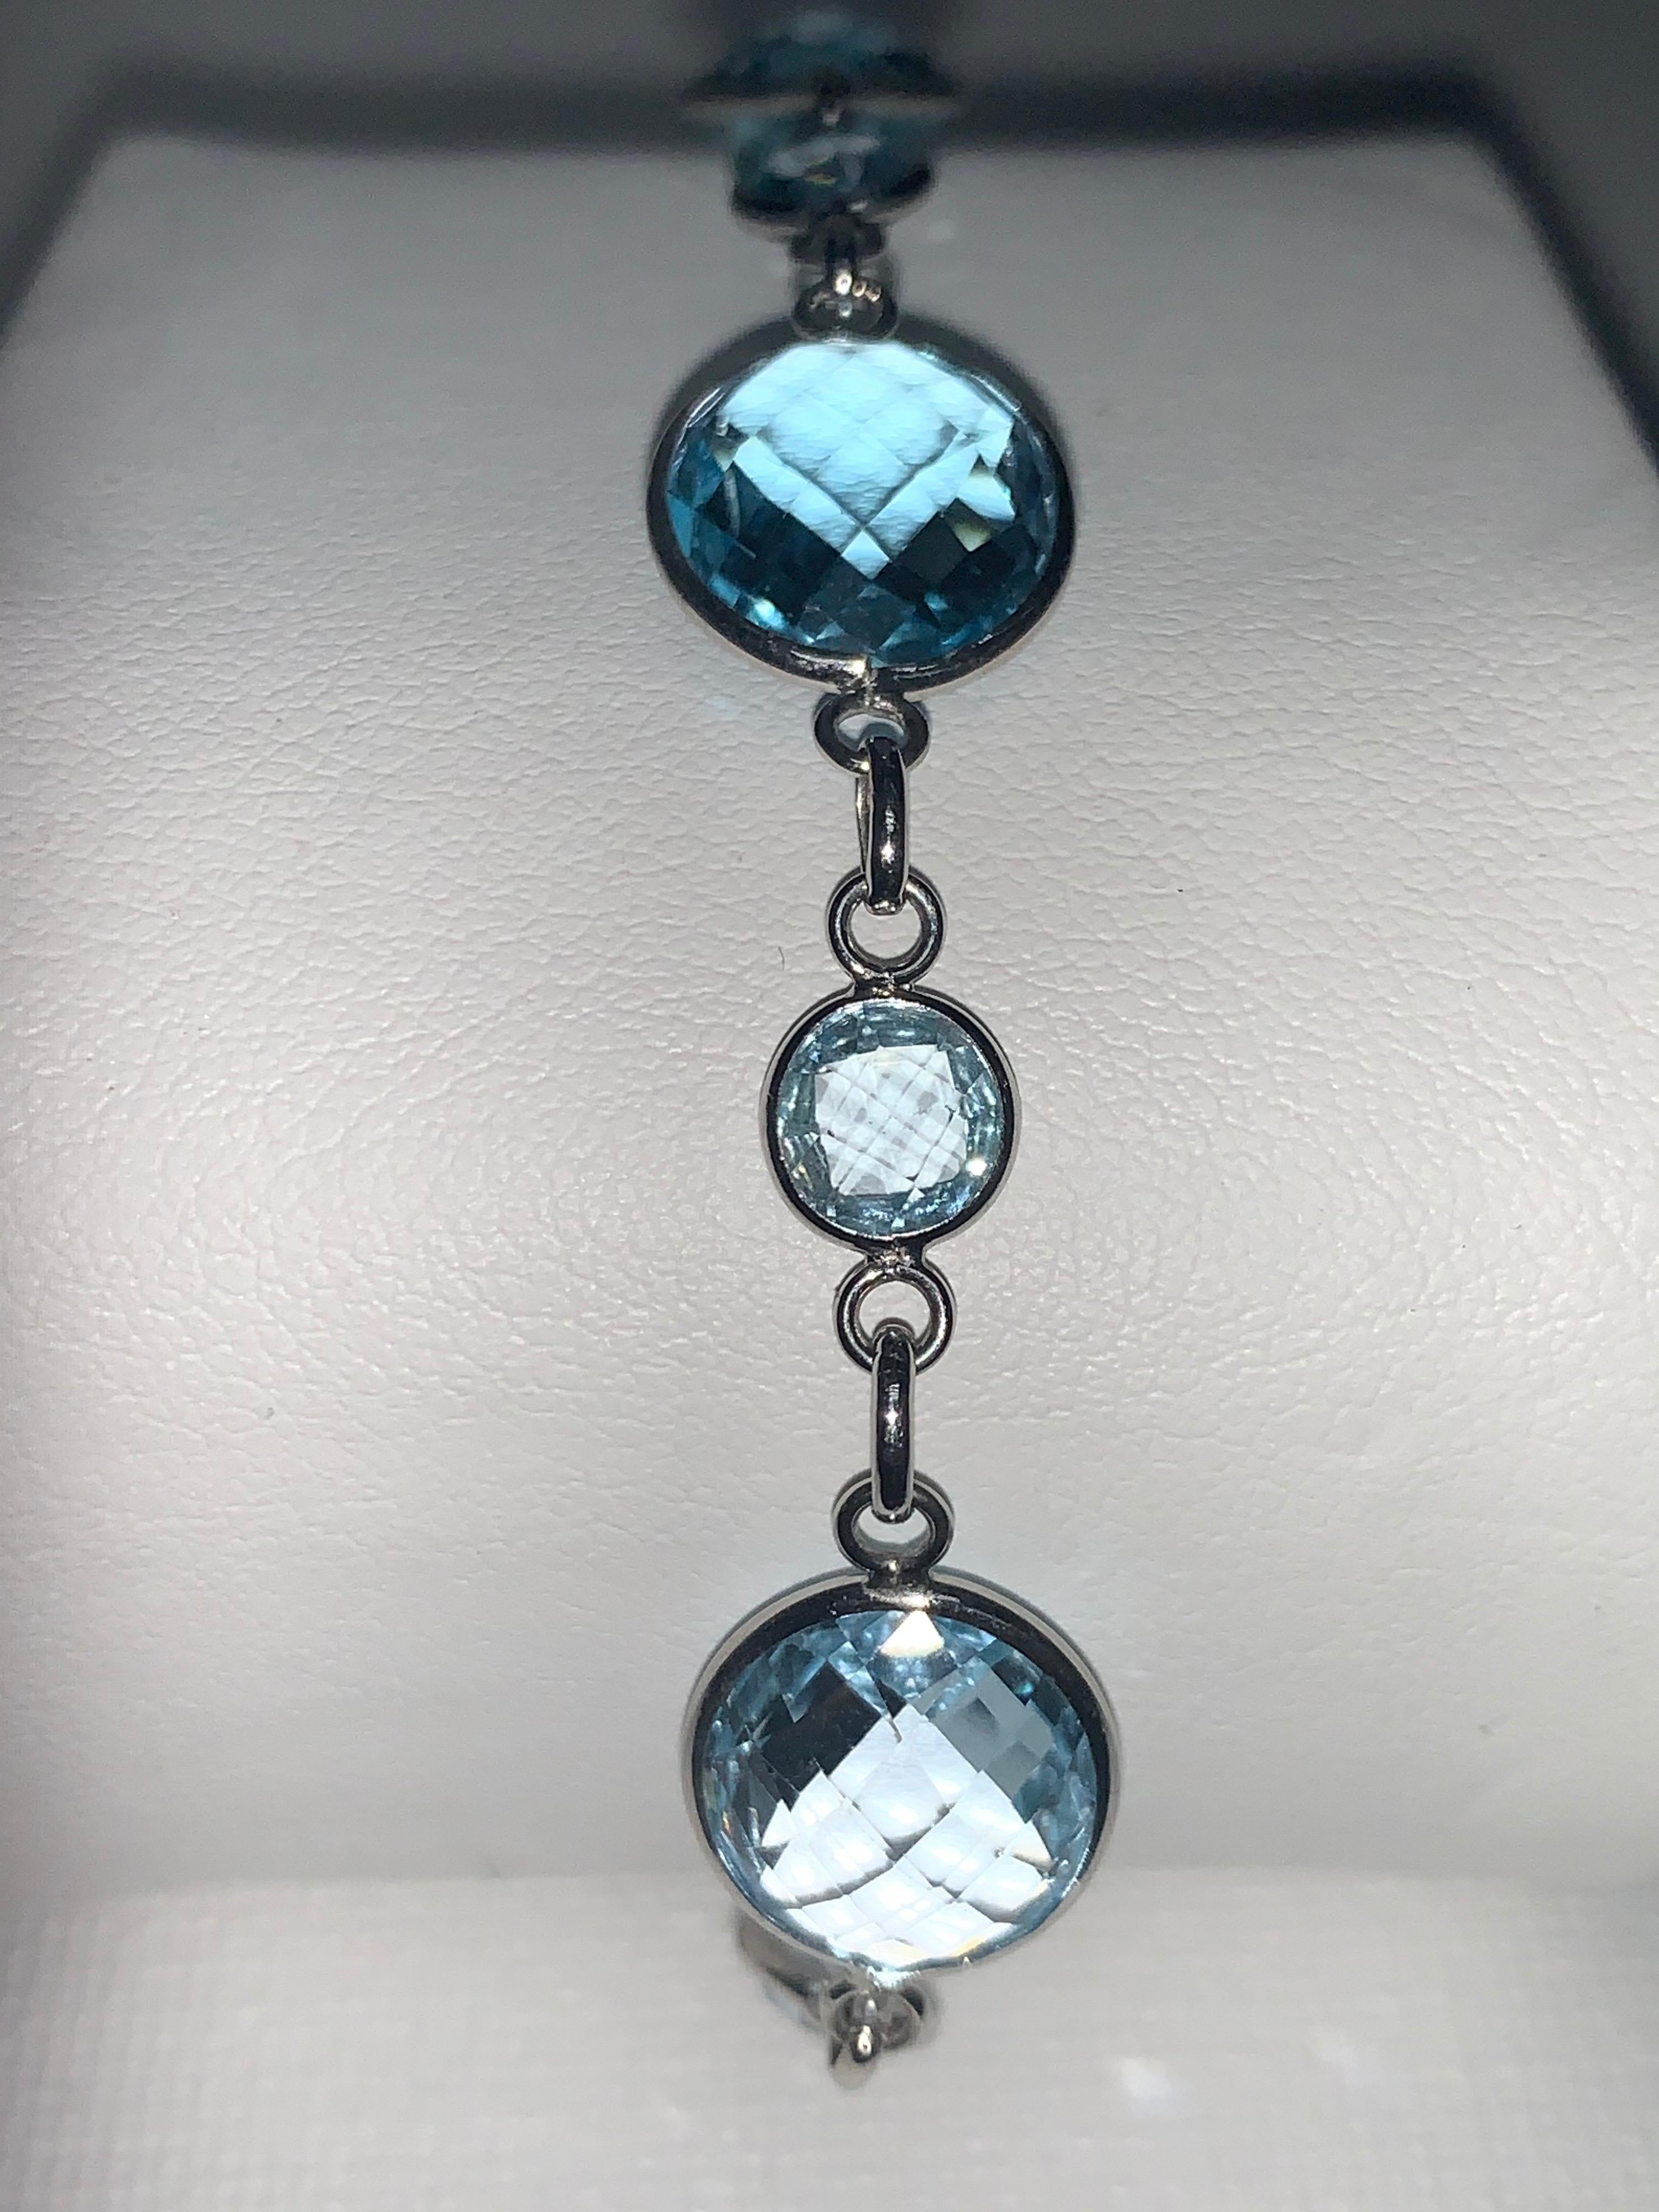 Feminine and Delicate 14 Karat White Gold Blue Topaz Handcrafted Link Bracelet. Beautiful gift for all age categories.  Whomever she is, she will love to receive and wear this beautiful bracelet.
14 Karat White Gold
Blue Topaz
Hand